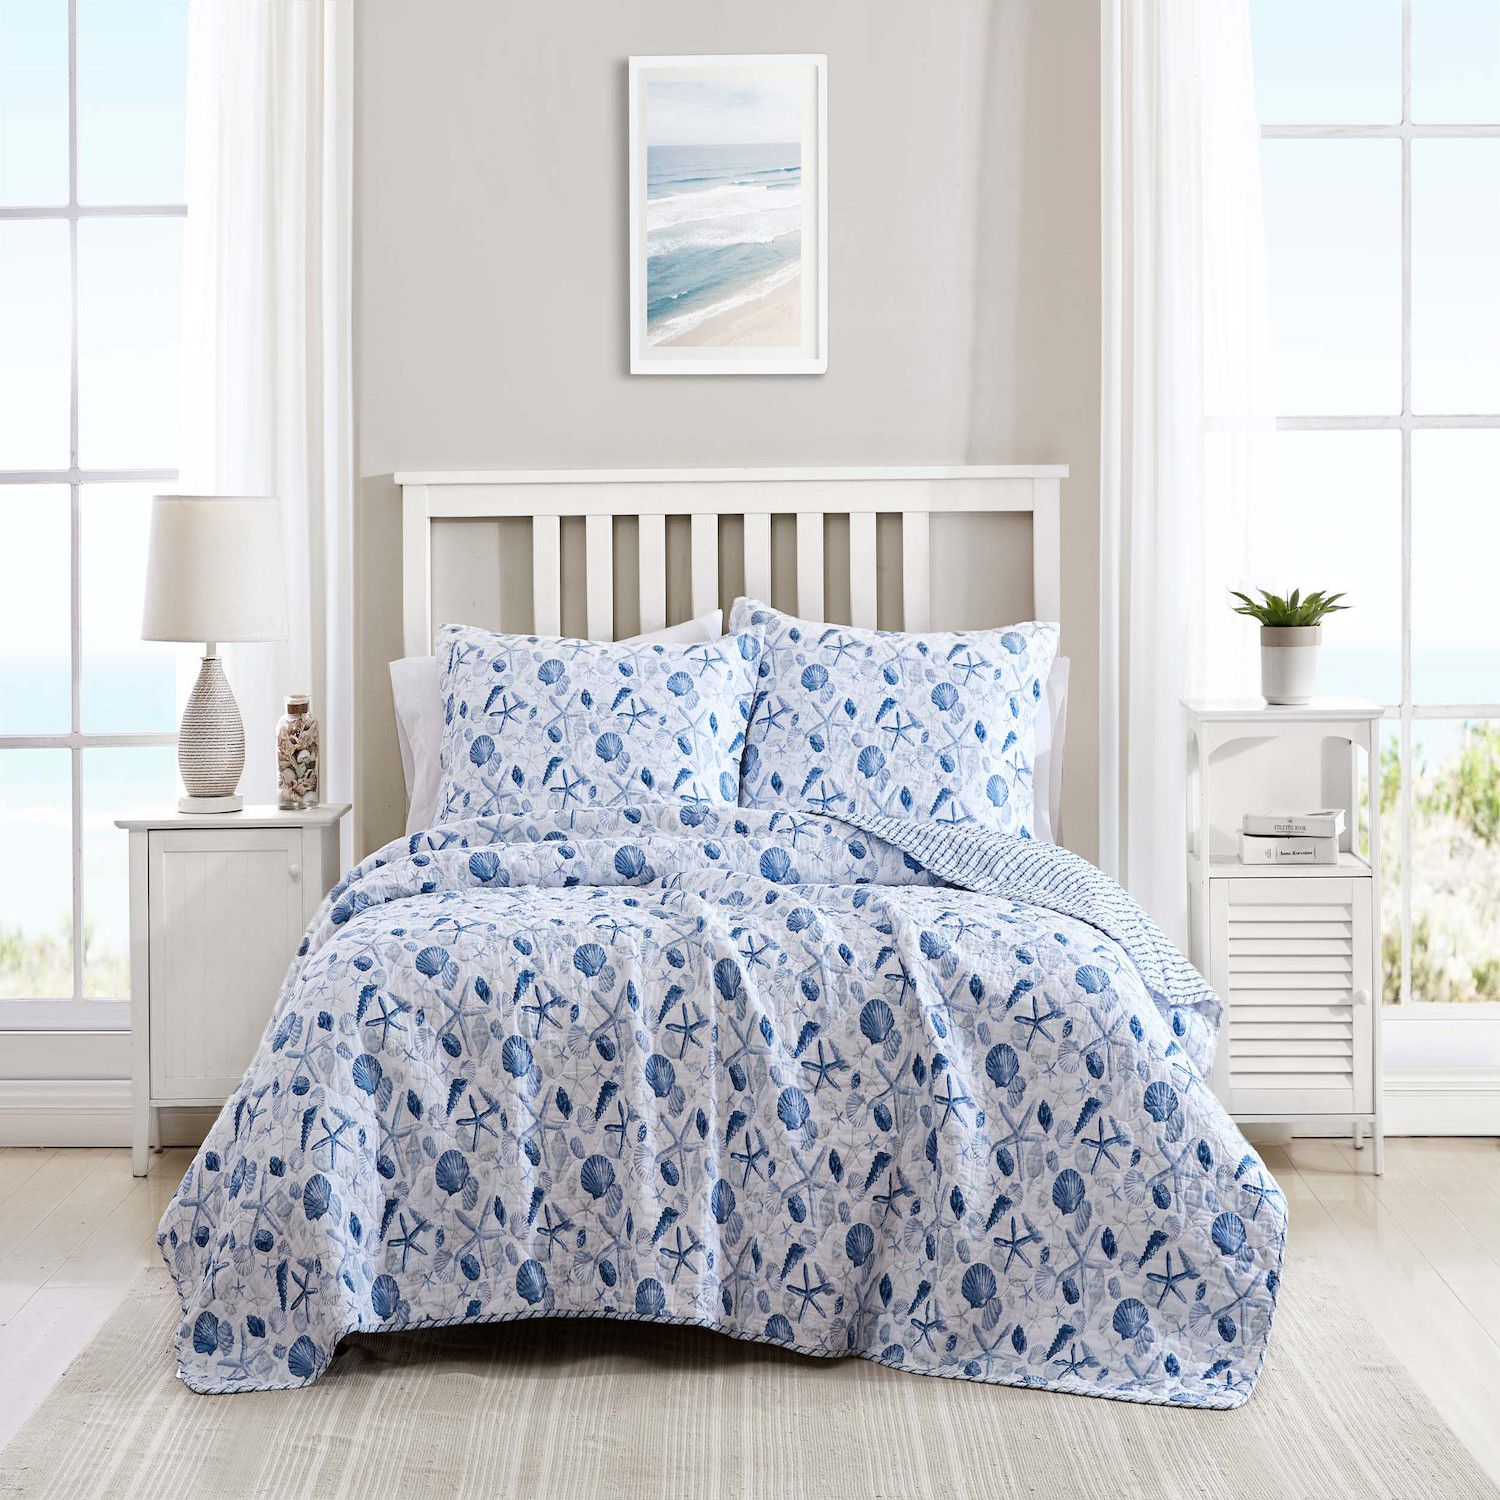 Image for Laura Ashley Sea Whispers Quilt Set with Shams at Kohl's.